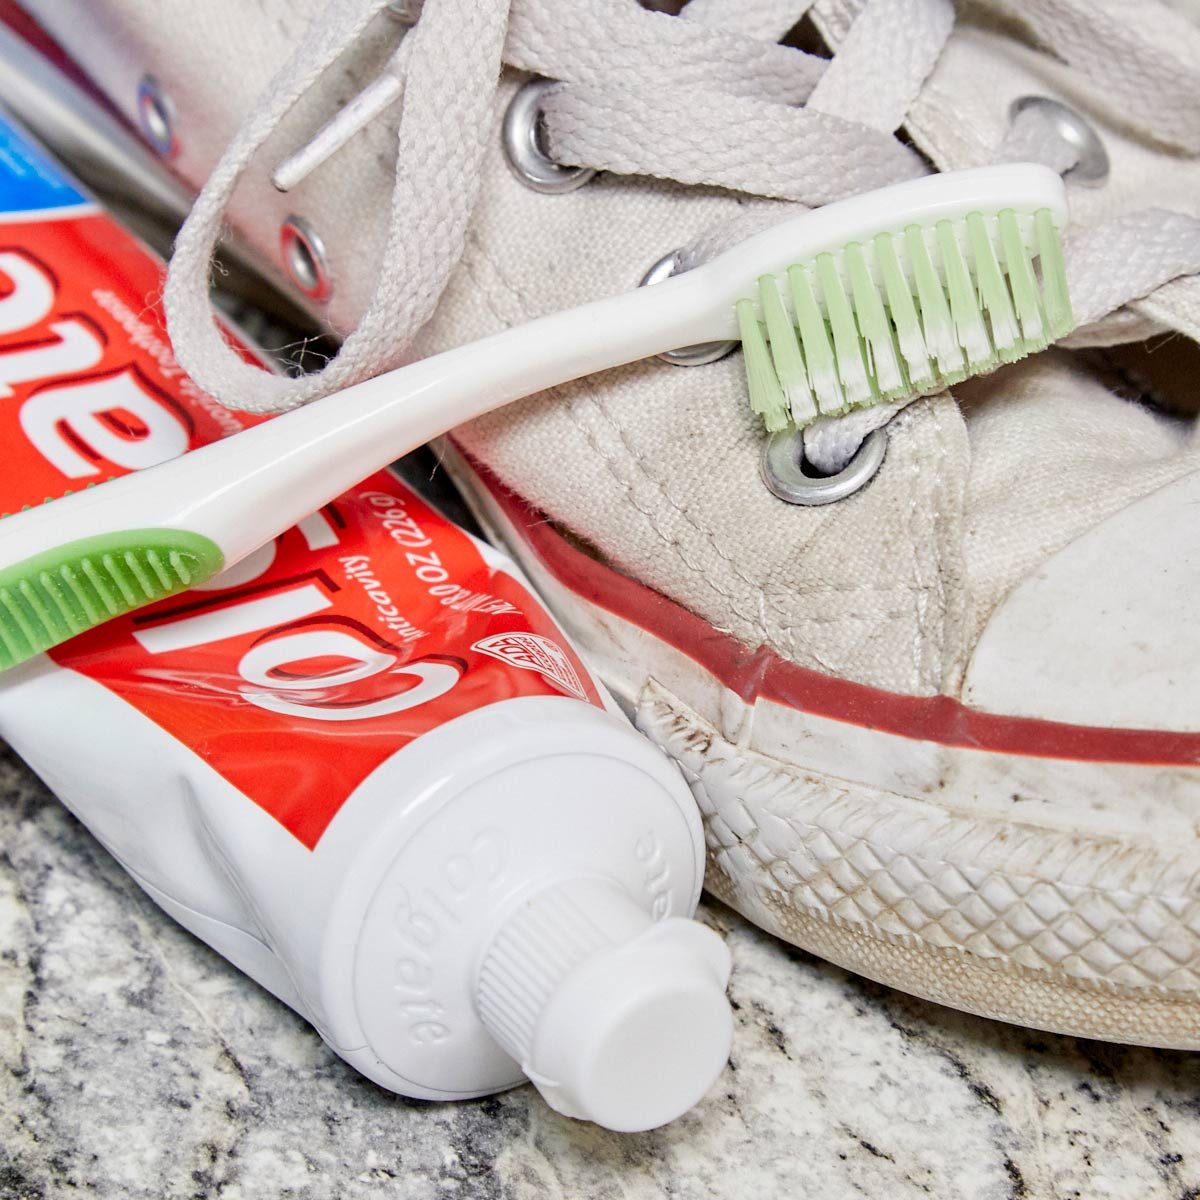 Use Toothpaste to Clean Sneakers — The 